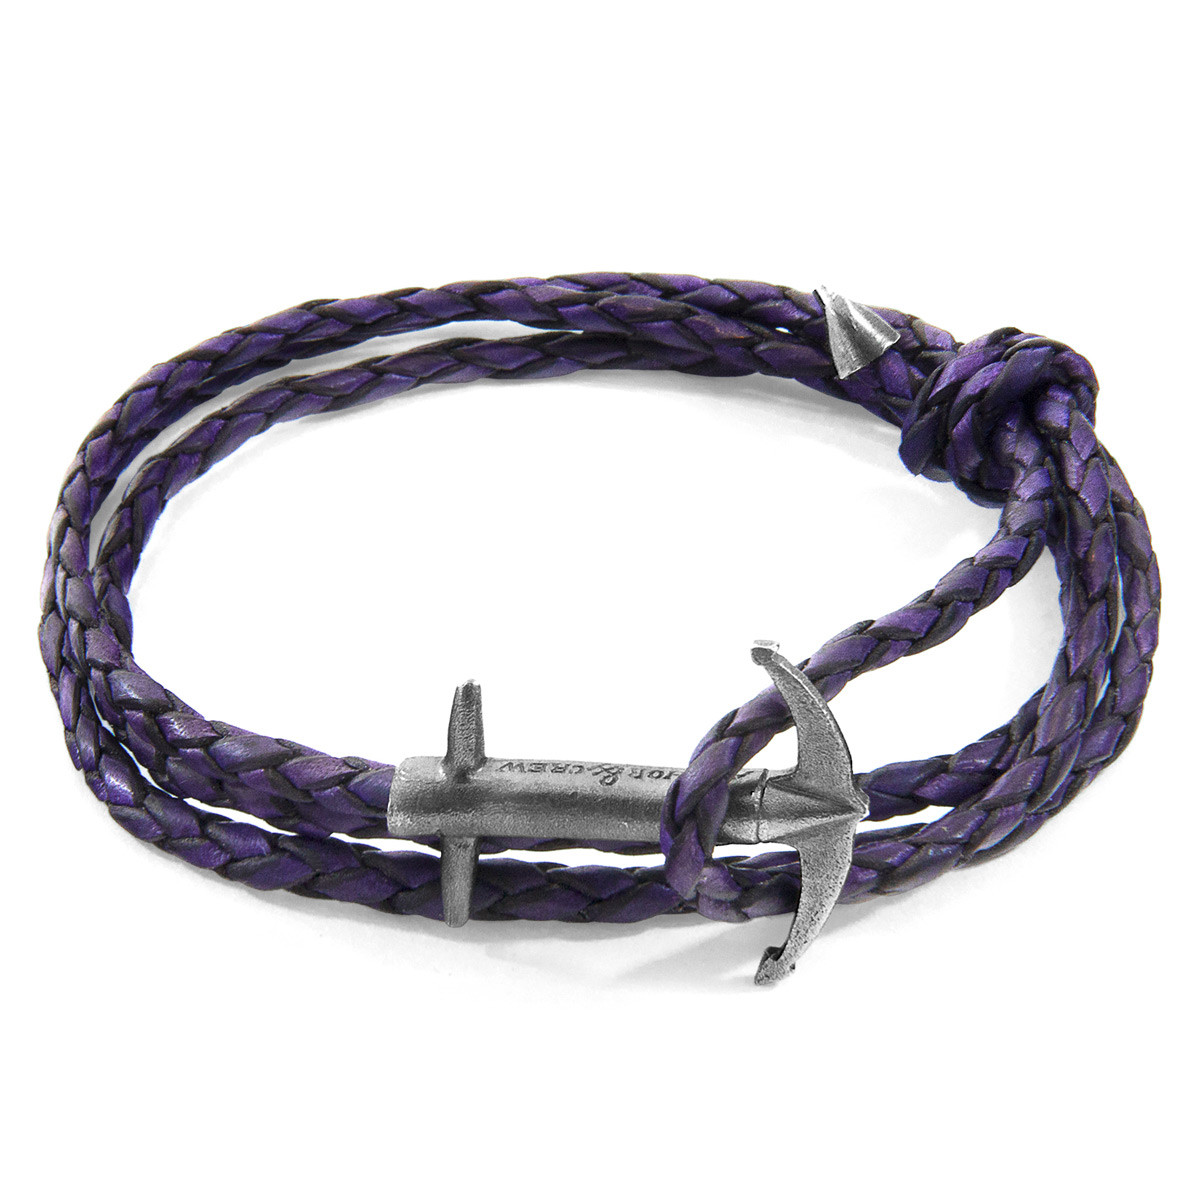 Grape Purple Admiral Anchor Silver and Braided Leather Bracelet